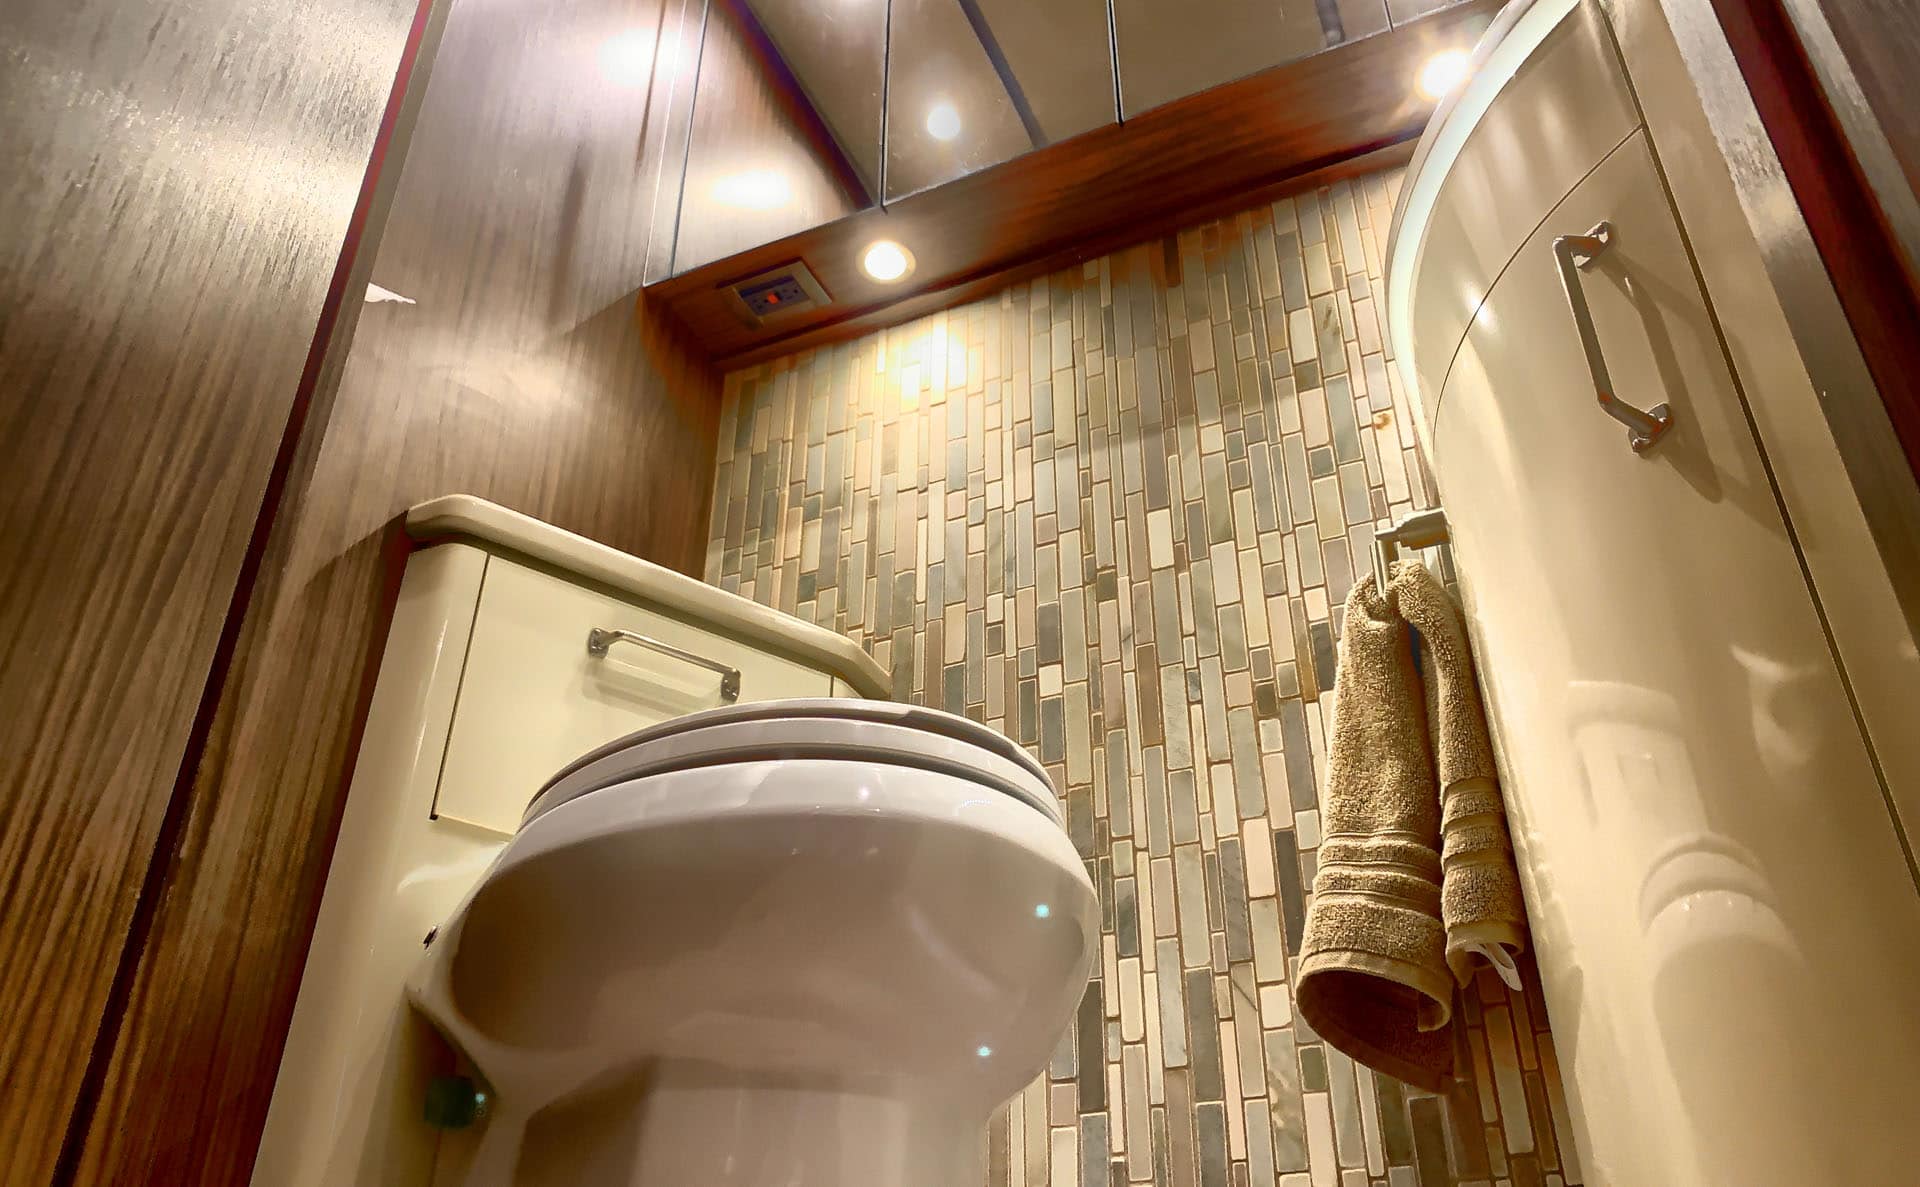 Everything You Need to Know About RV Toilets and Black Tanks